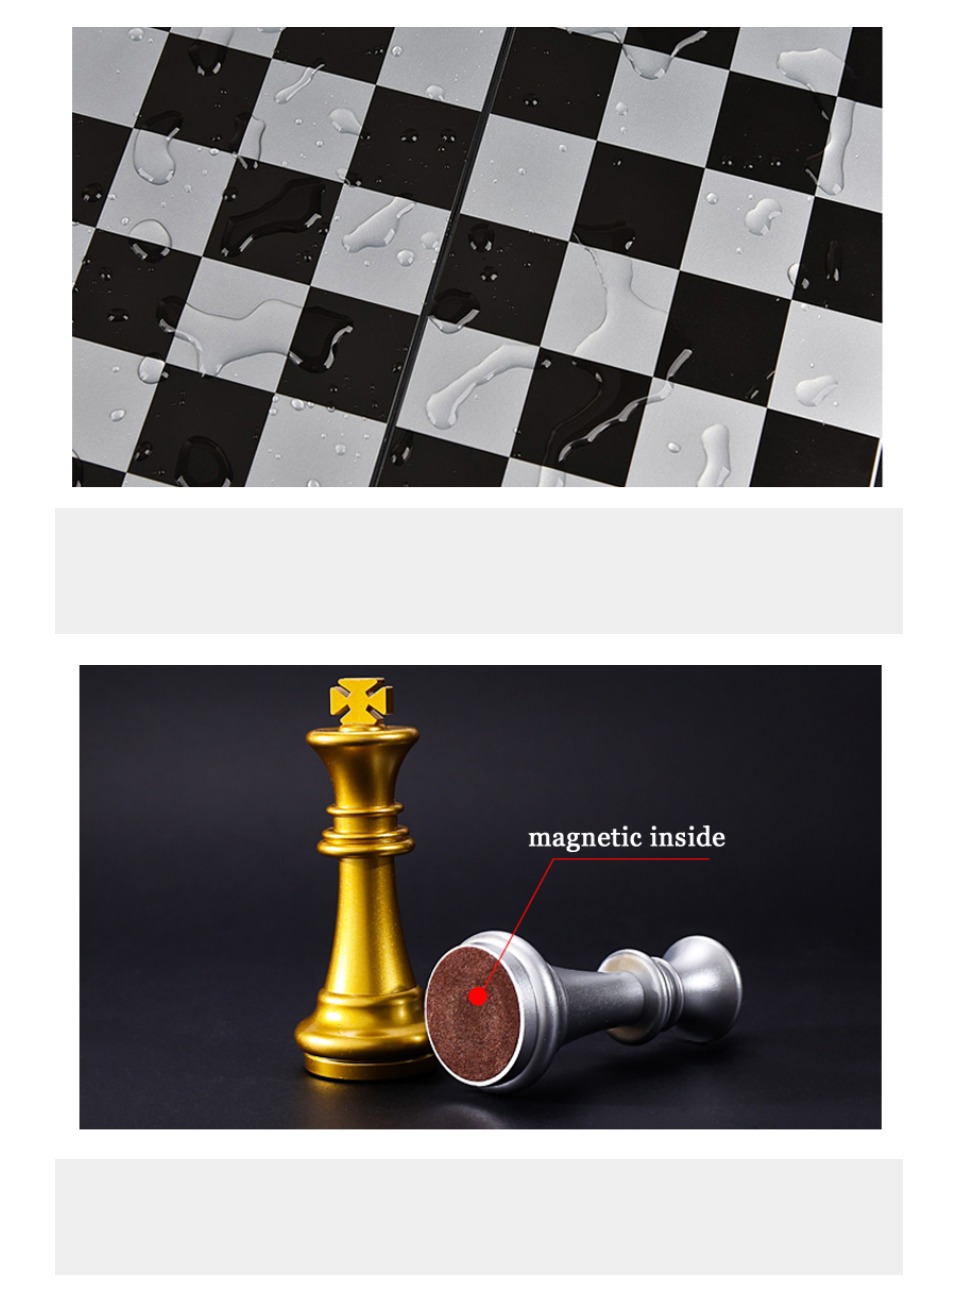 32PCS-Medieval-Chess-Set-With-High-Quality-Chessboard-Gold-Silver-Chess-Pieces-Magnetic-Board-Game-C-1841255-8